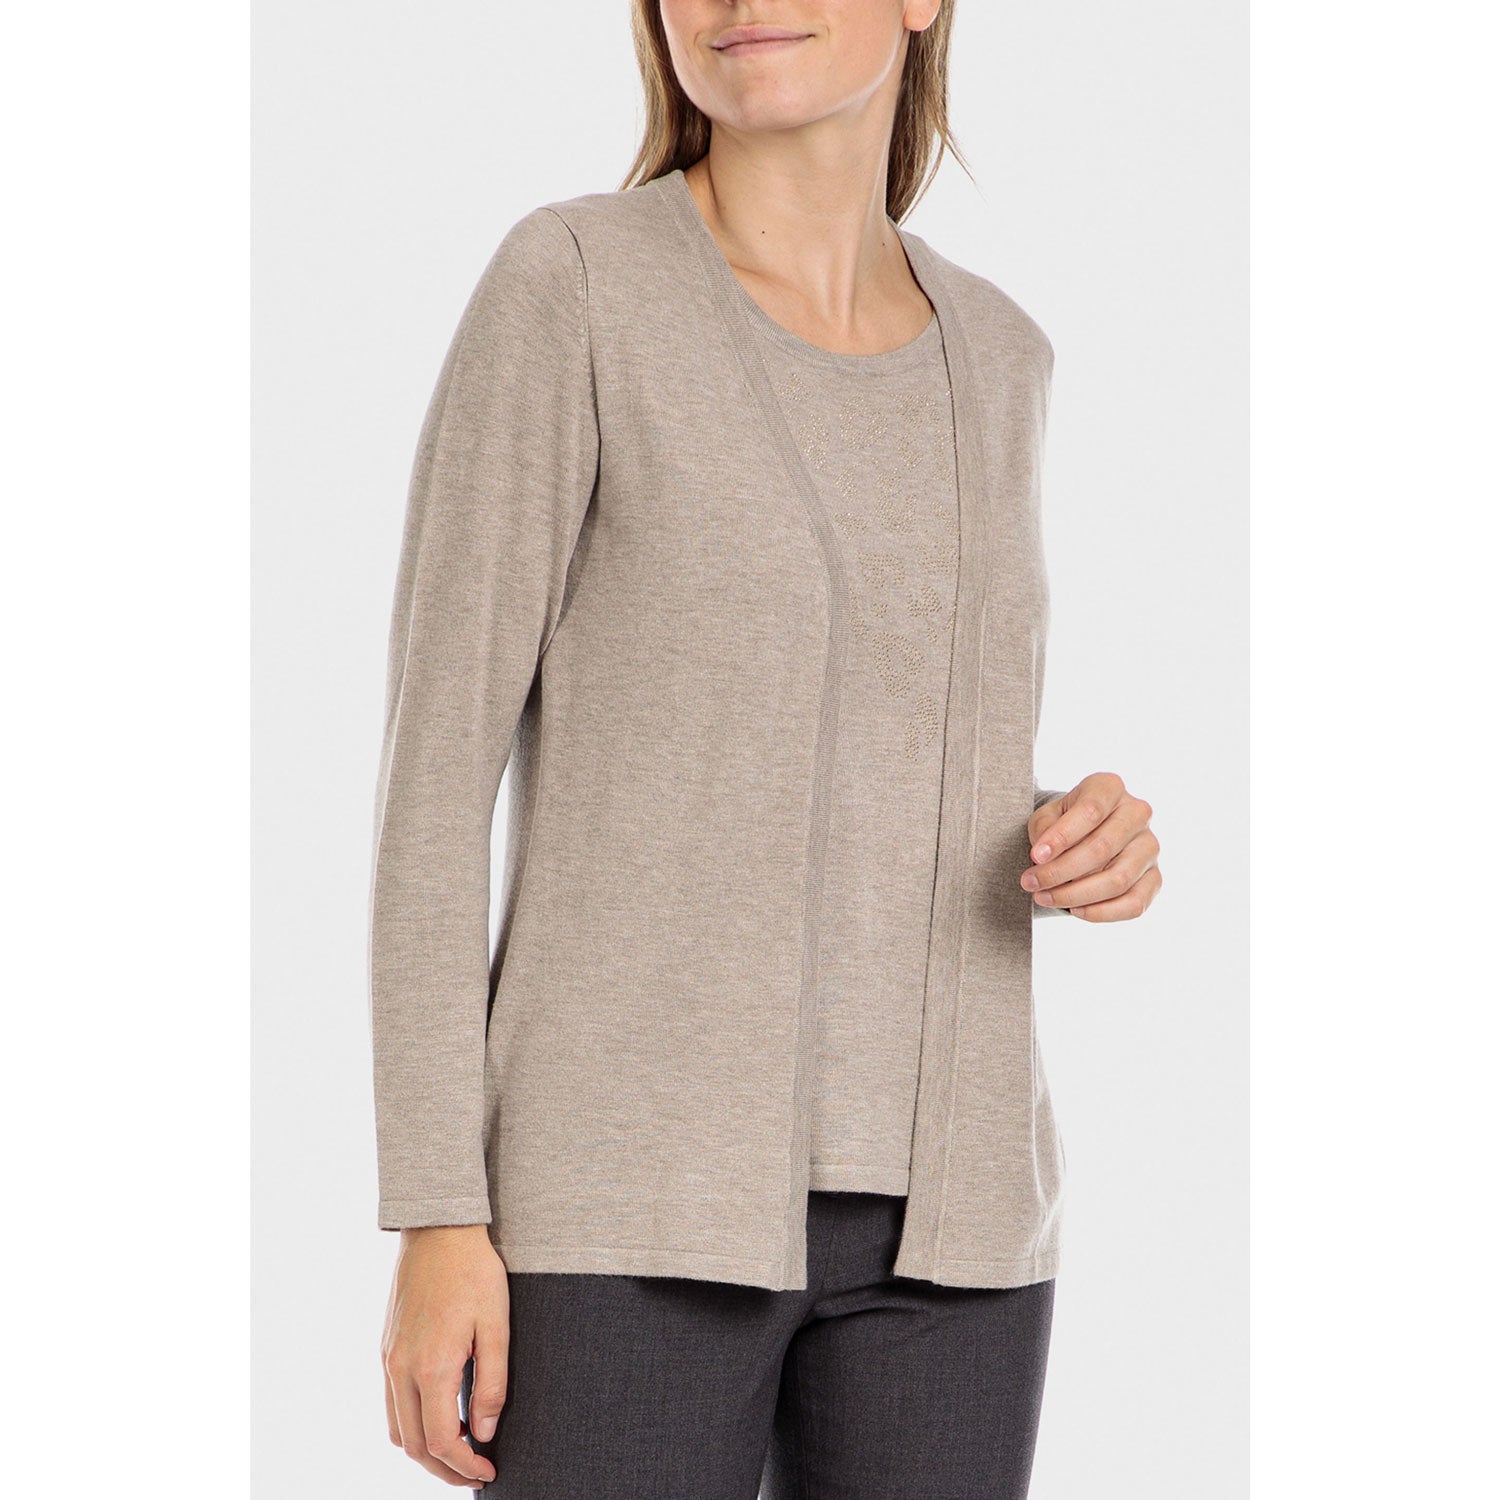 Punt Roma Faux Knitted Twinset - Beige Camel 1 Shaws Department Stores